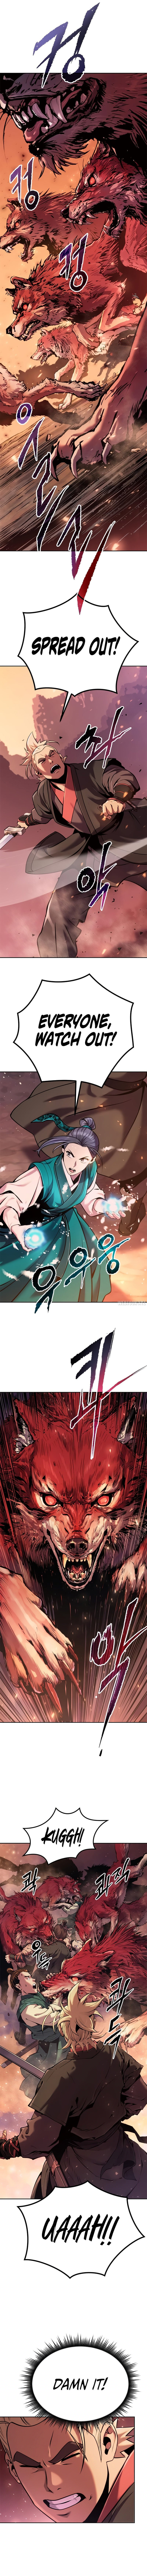 chronicles-of-the-demon-faction-chap-39-11